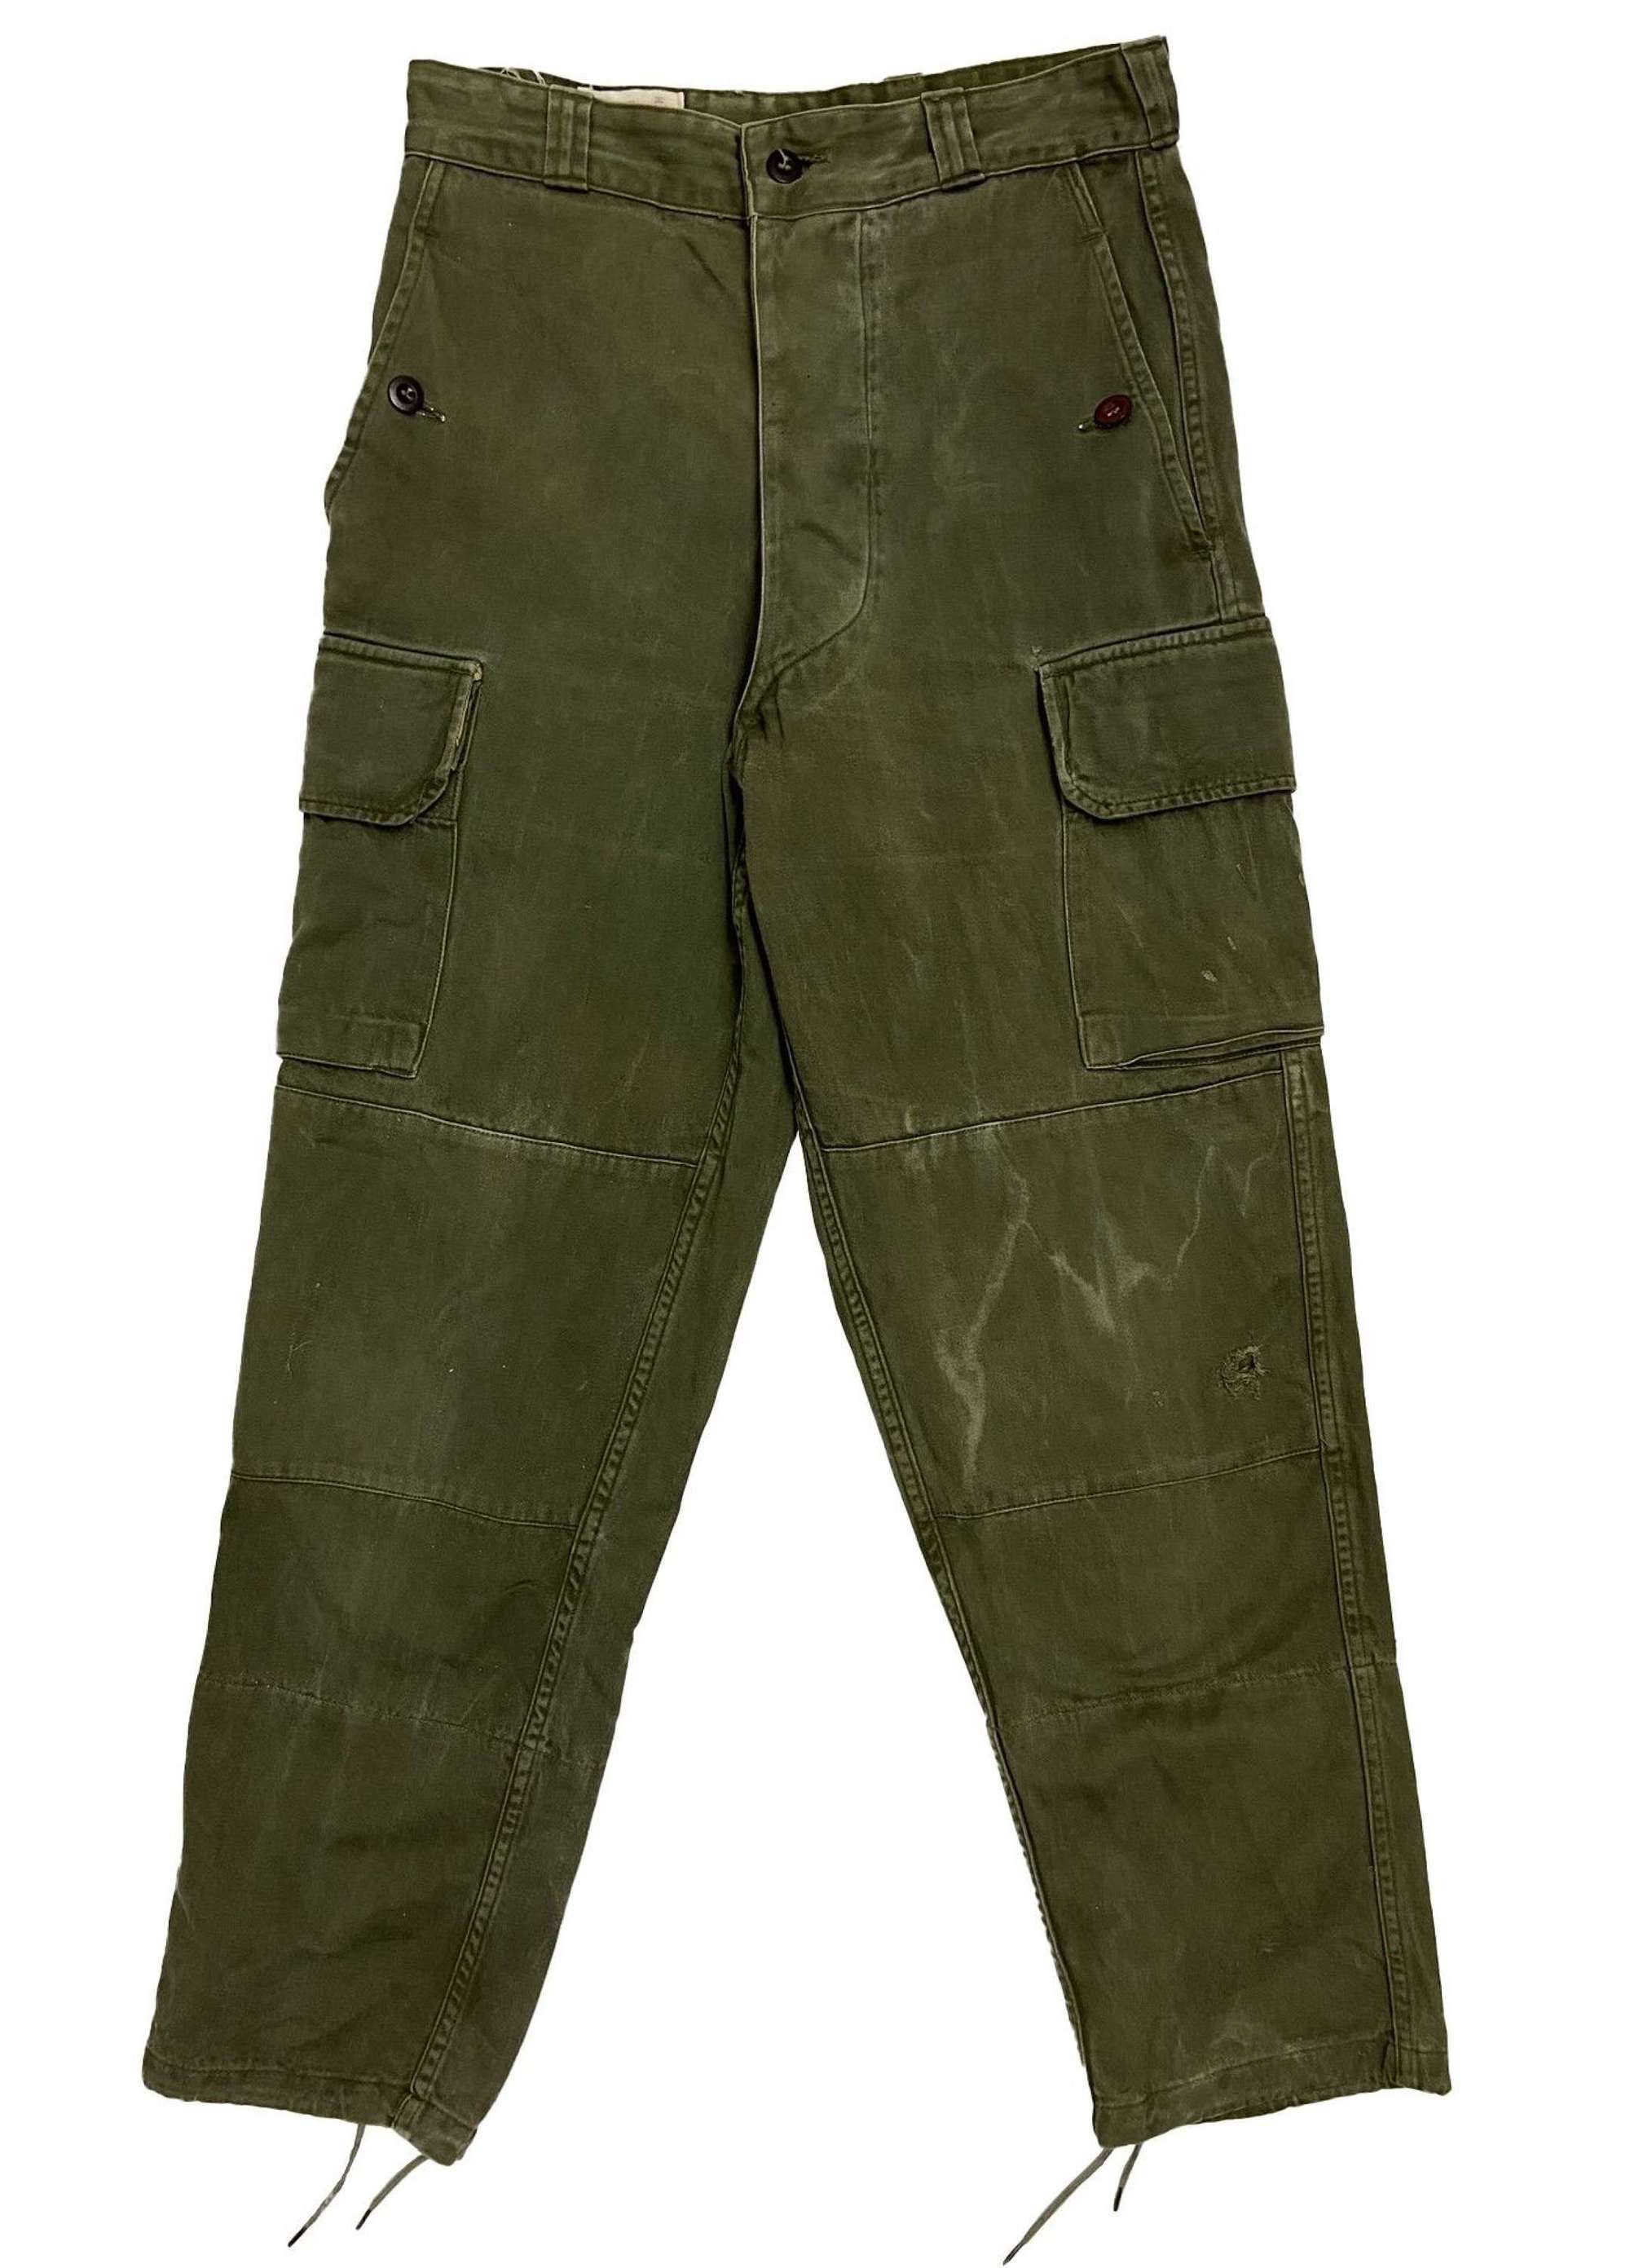 Original 1965 Dated 1964 Model S300 French Army Combat Trousers